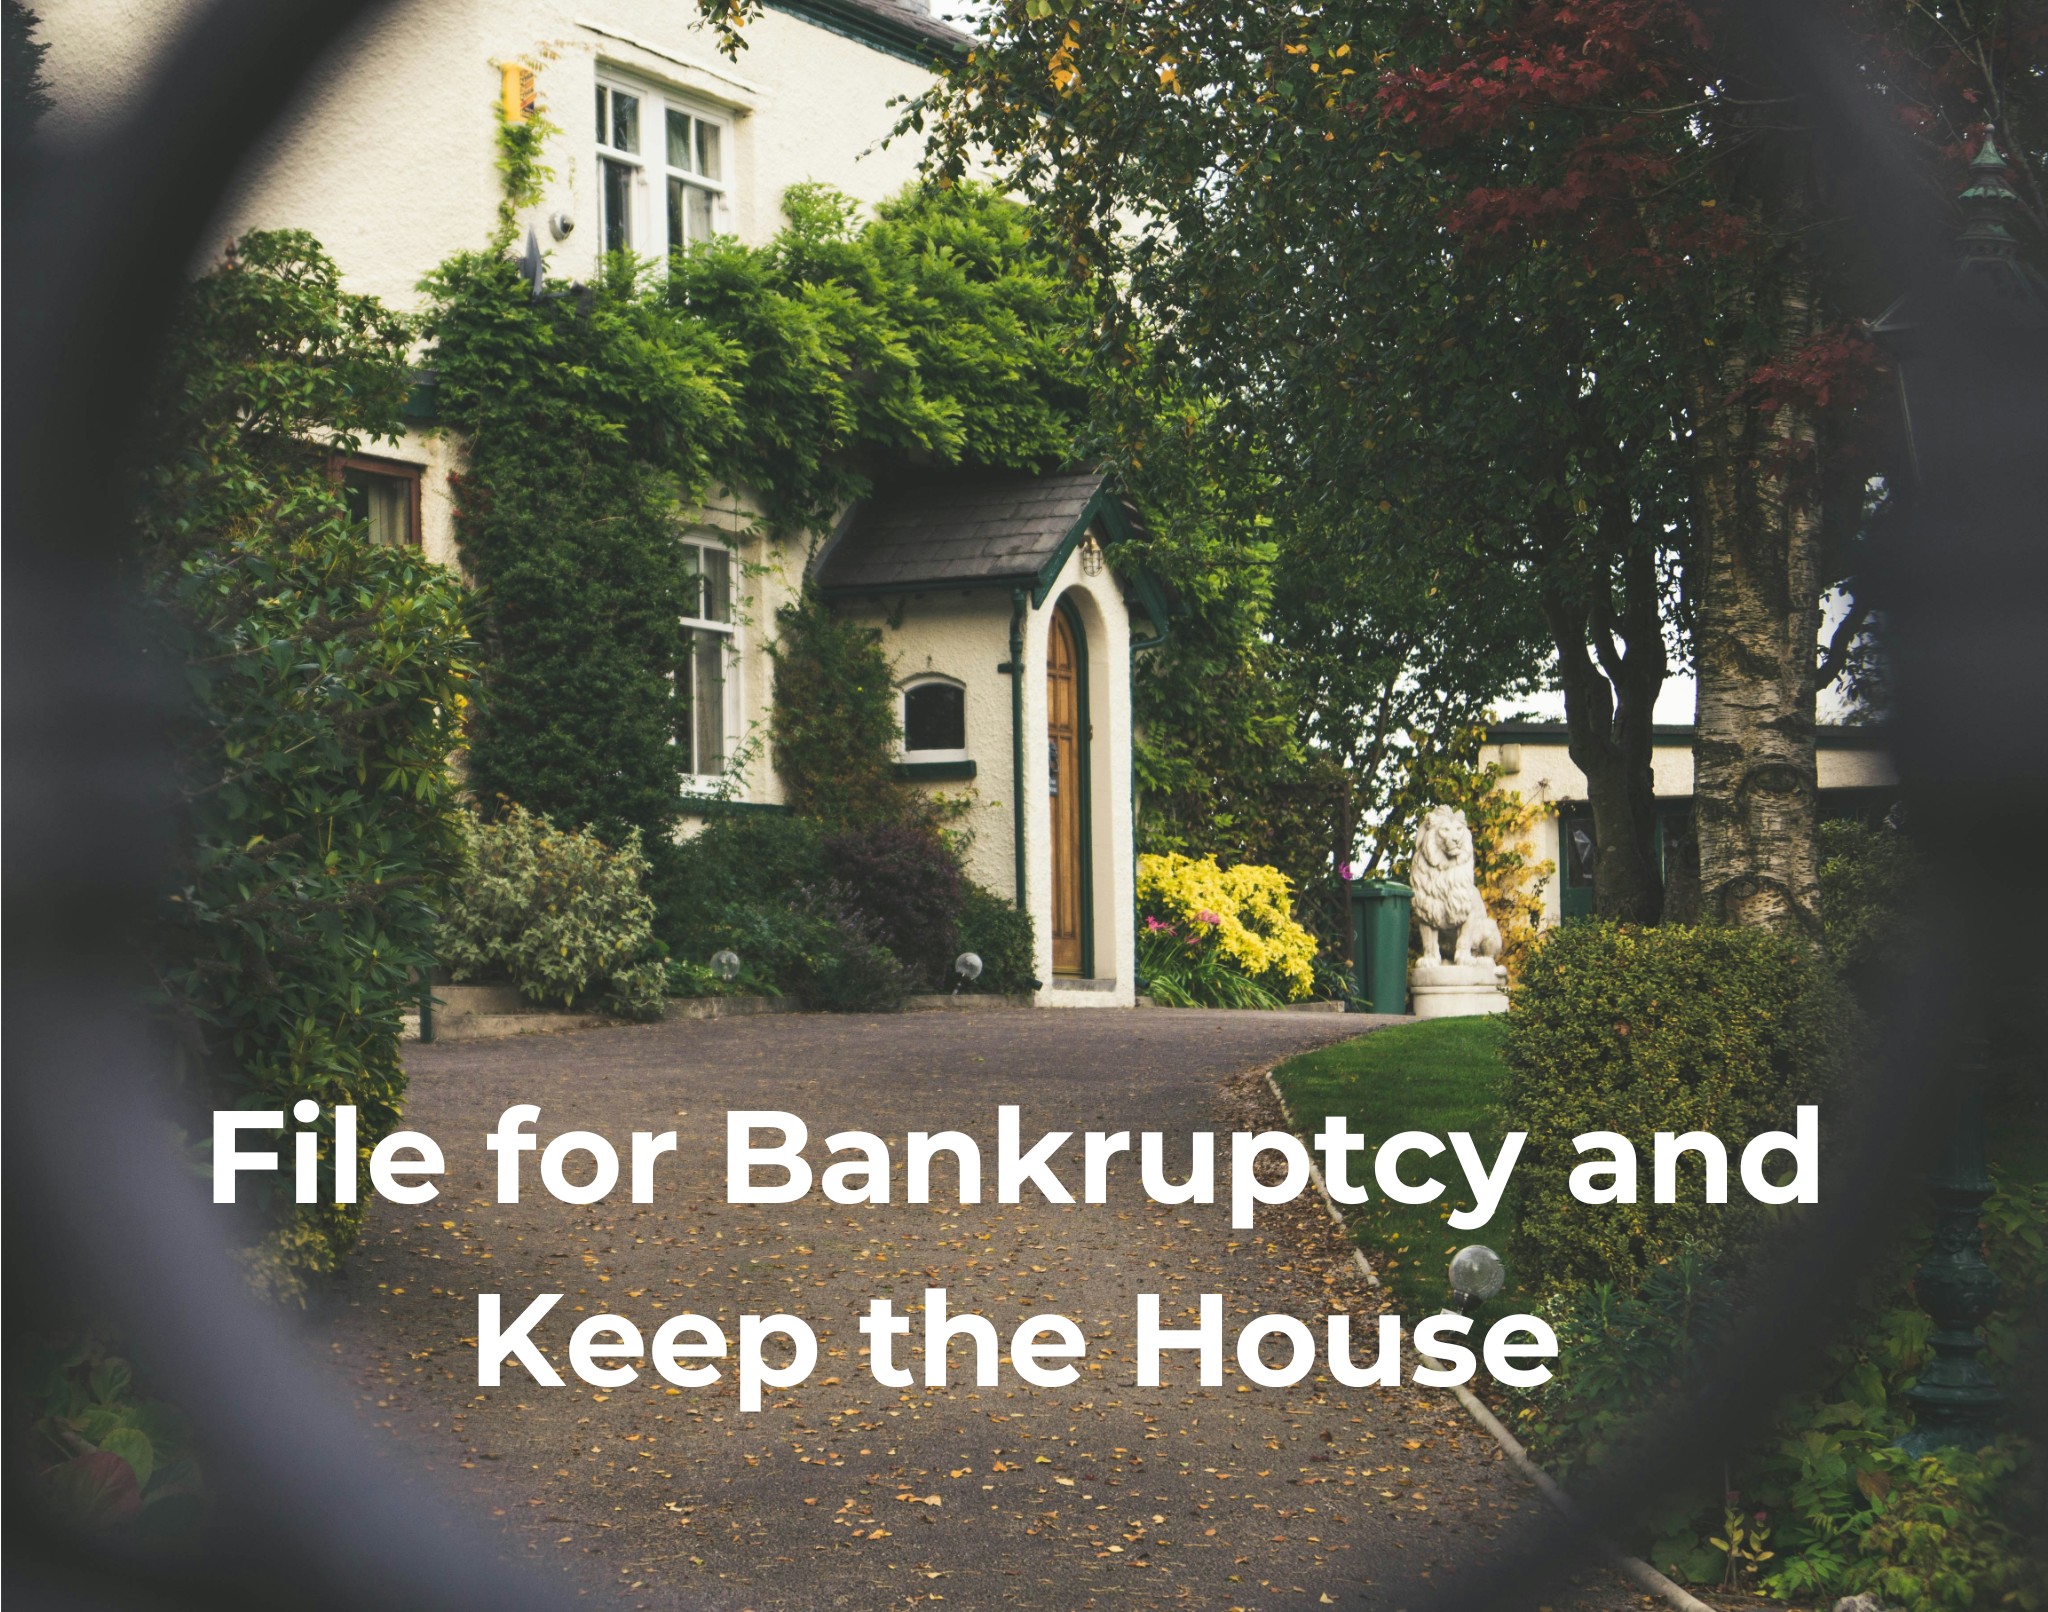 Can You File Bankruptcy and Keep Your House?